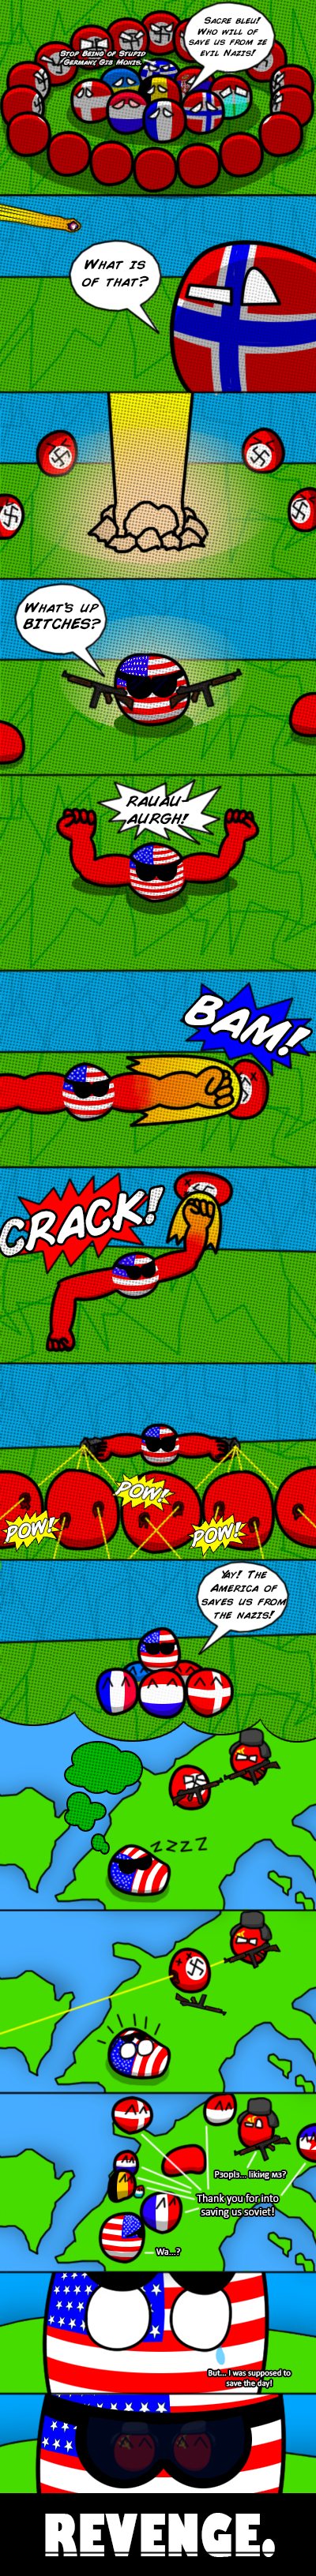 Polandball Comics - Page 2 How+the+Cold+War+Started..+In+this+comic+as+I_10319d_4976000